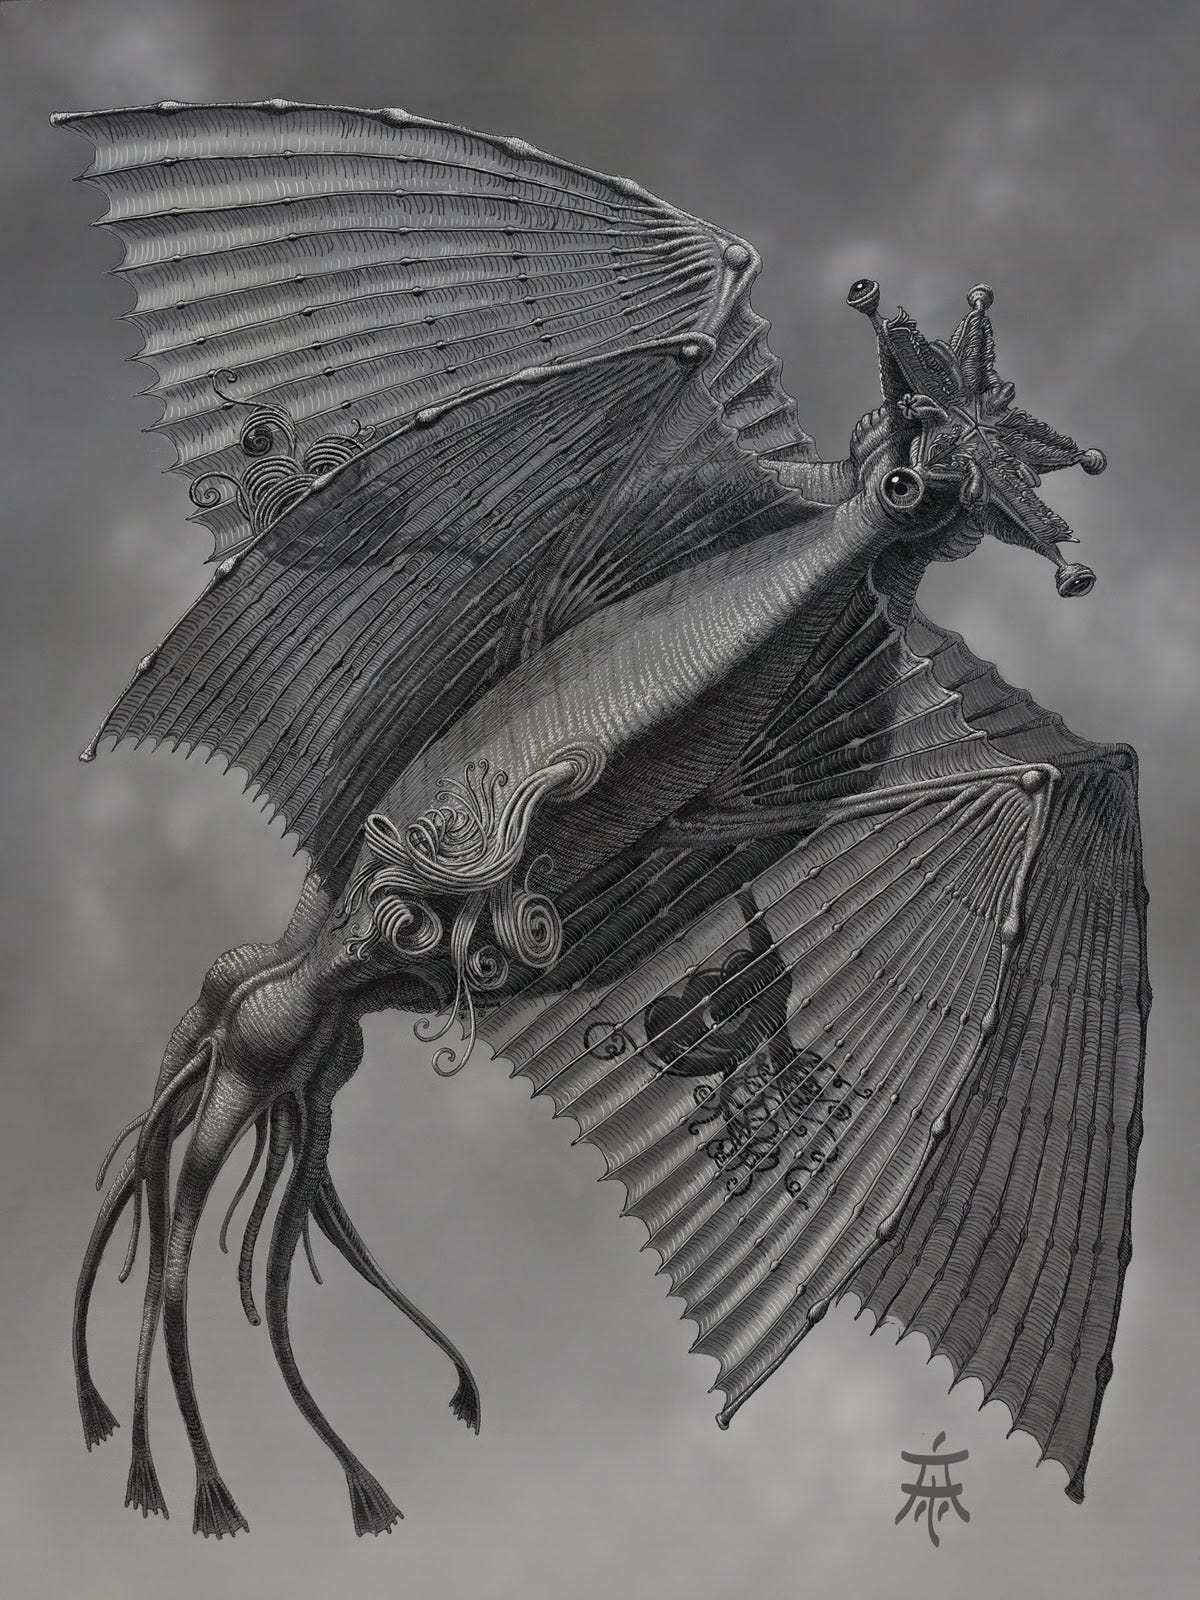 Art by Tom Ardans. It might be fun to have a body like this for the Meme of it. How tf were they supposed to fly though? They must either not be 3D+1 or just be the equiv. to stunted apes like we are in a different atmosphere. 